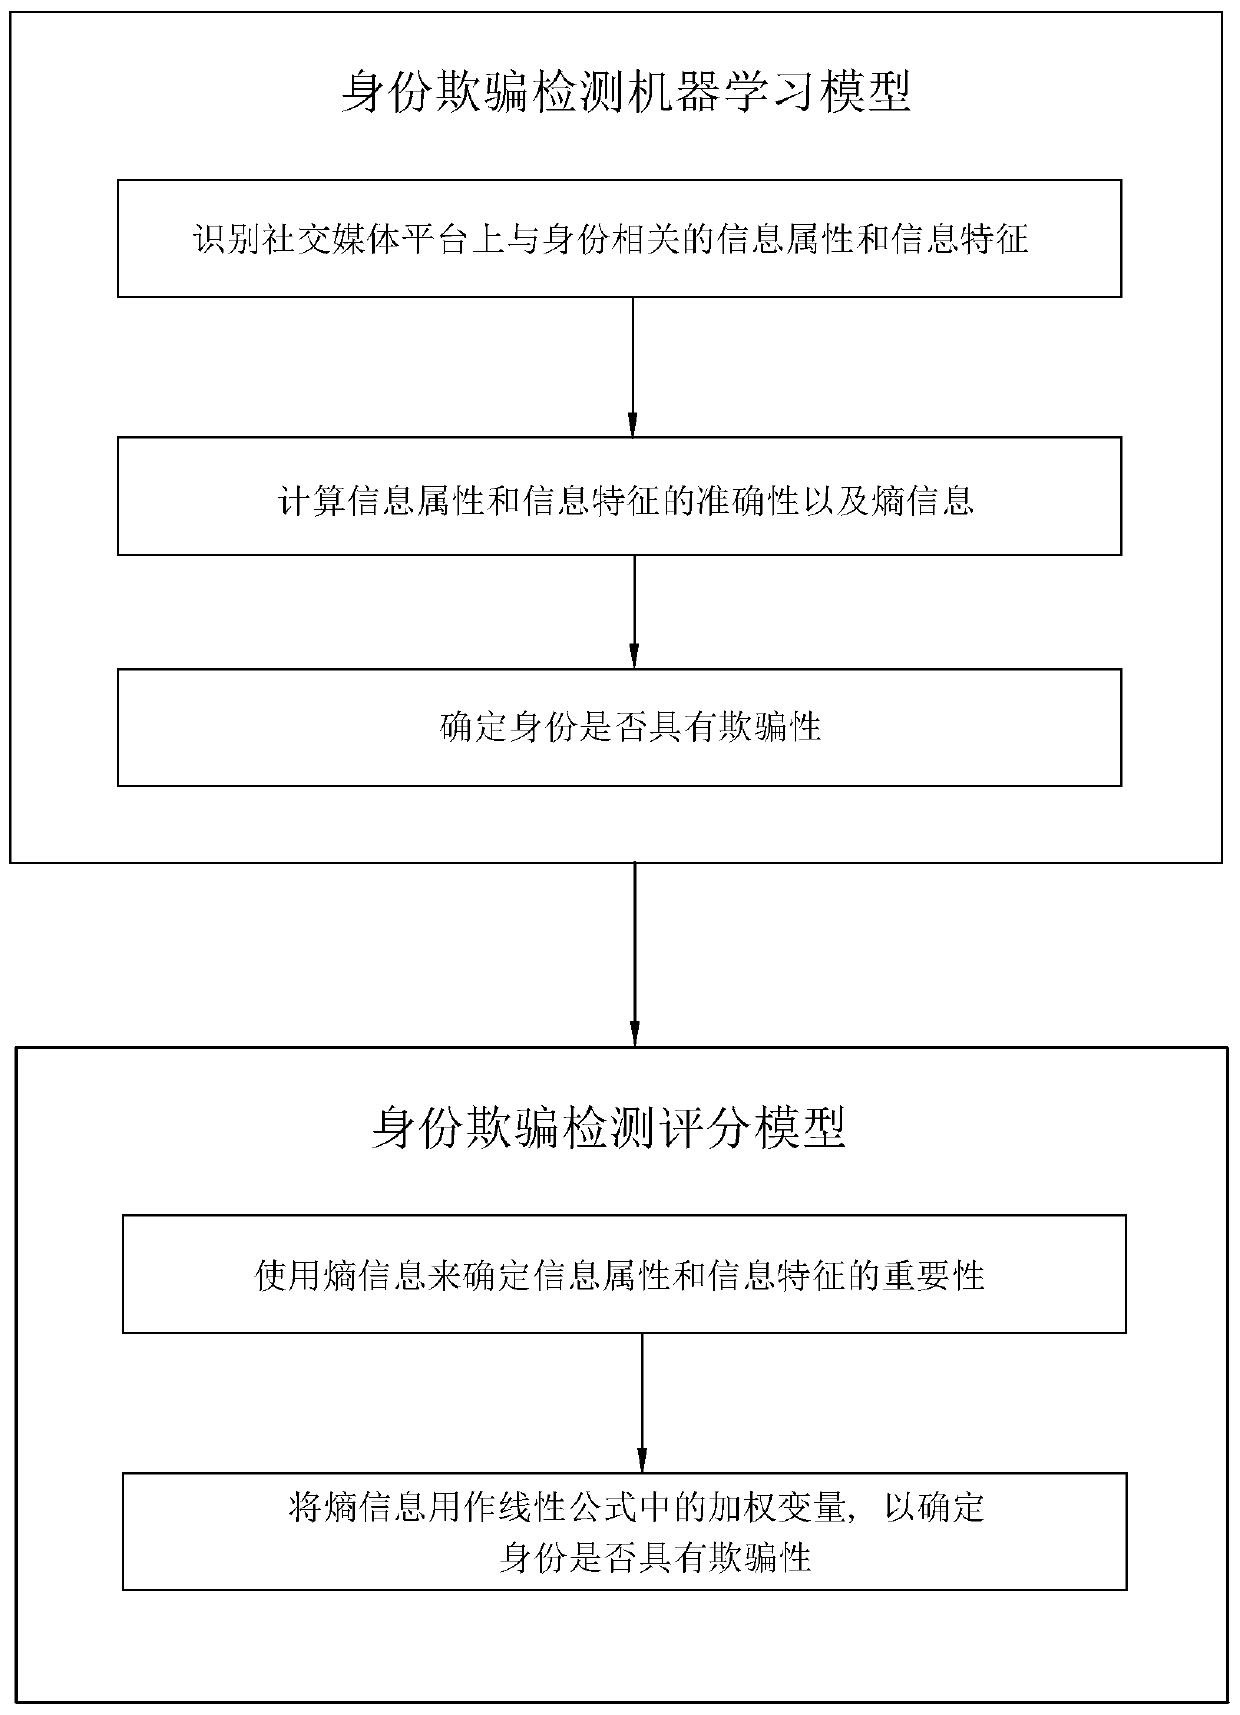 Identity spoofing detection method and system, device and storage medium